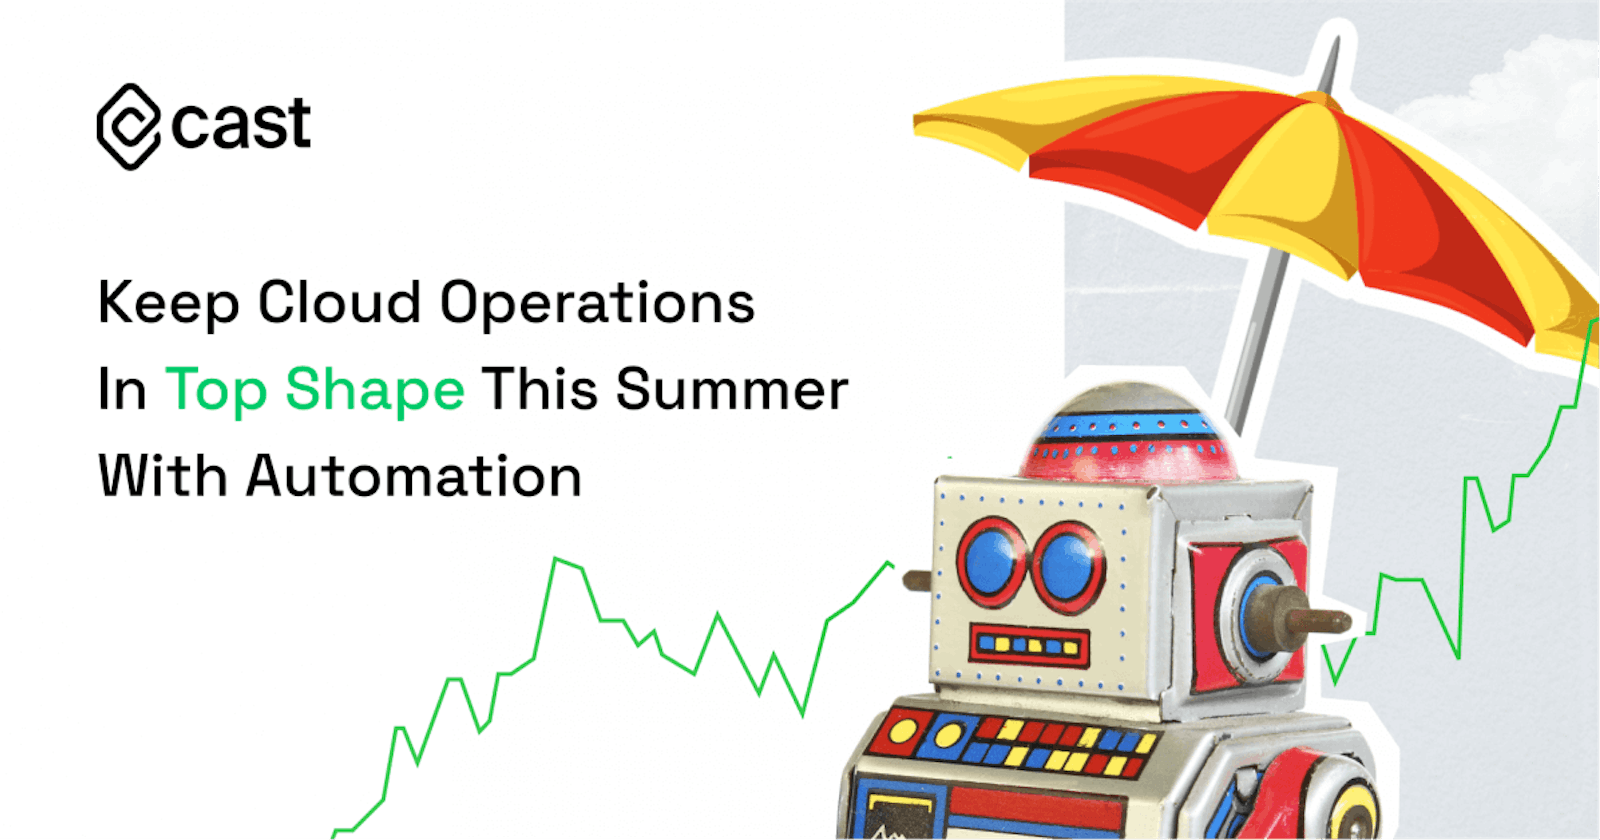 Keep Cloud Operations In Top Shape This Summer With Automation